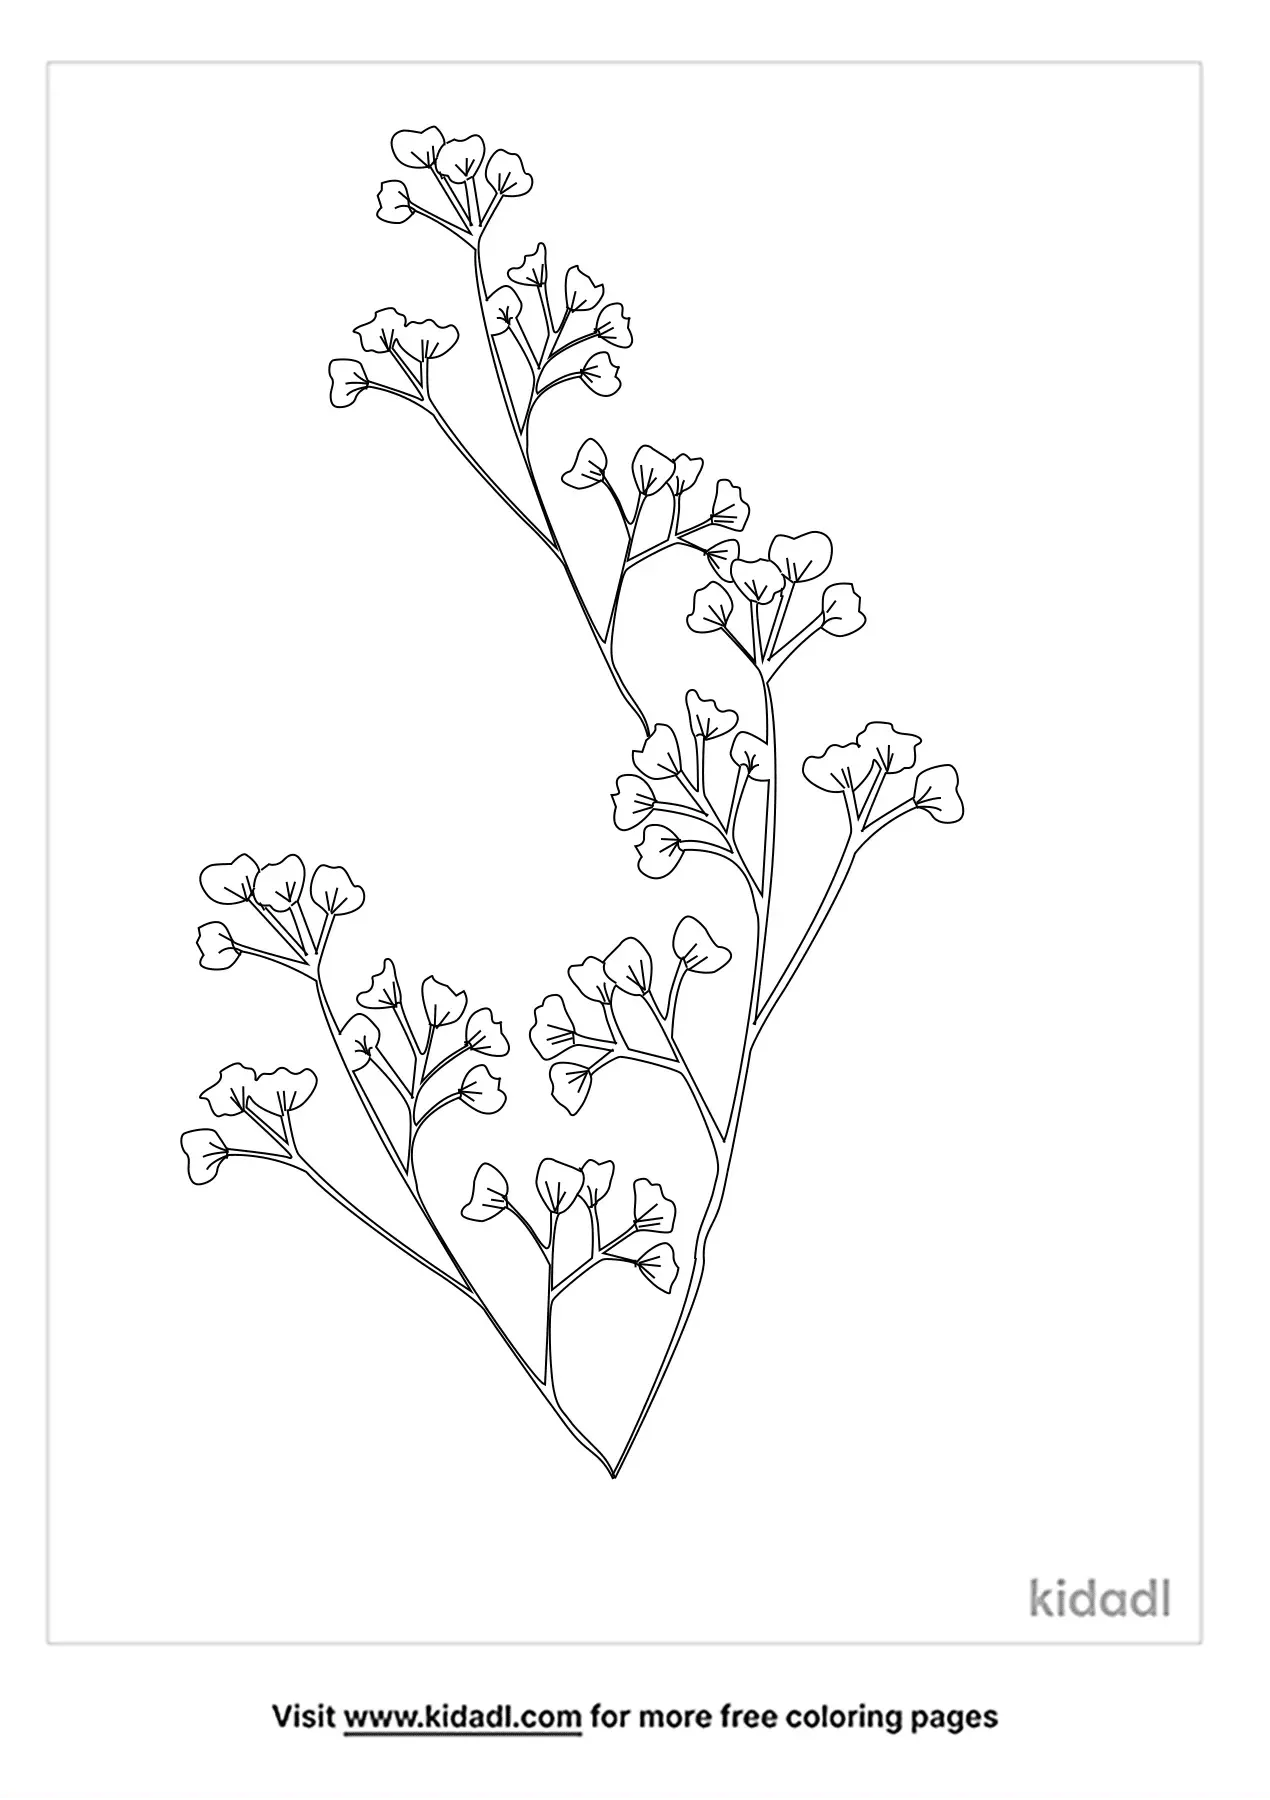 423 Babys Breath Flower Drawing Images, Stock Photos & Vectors |  Shutterstock